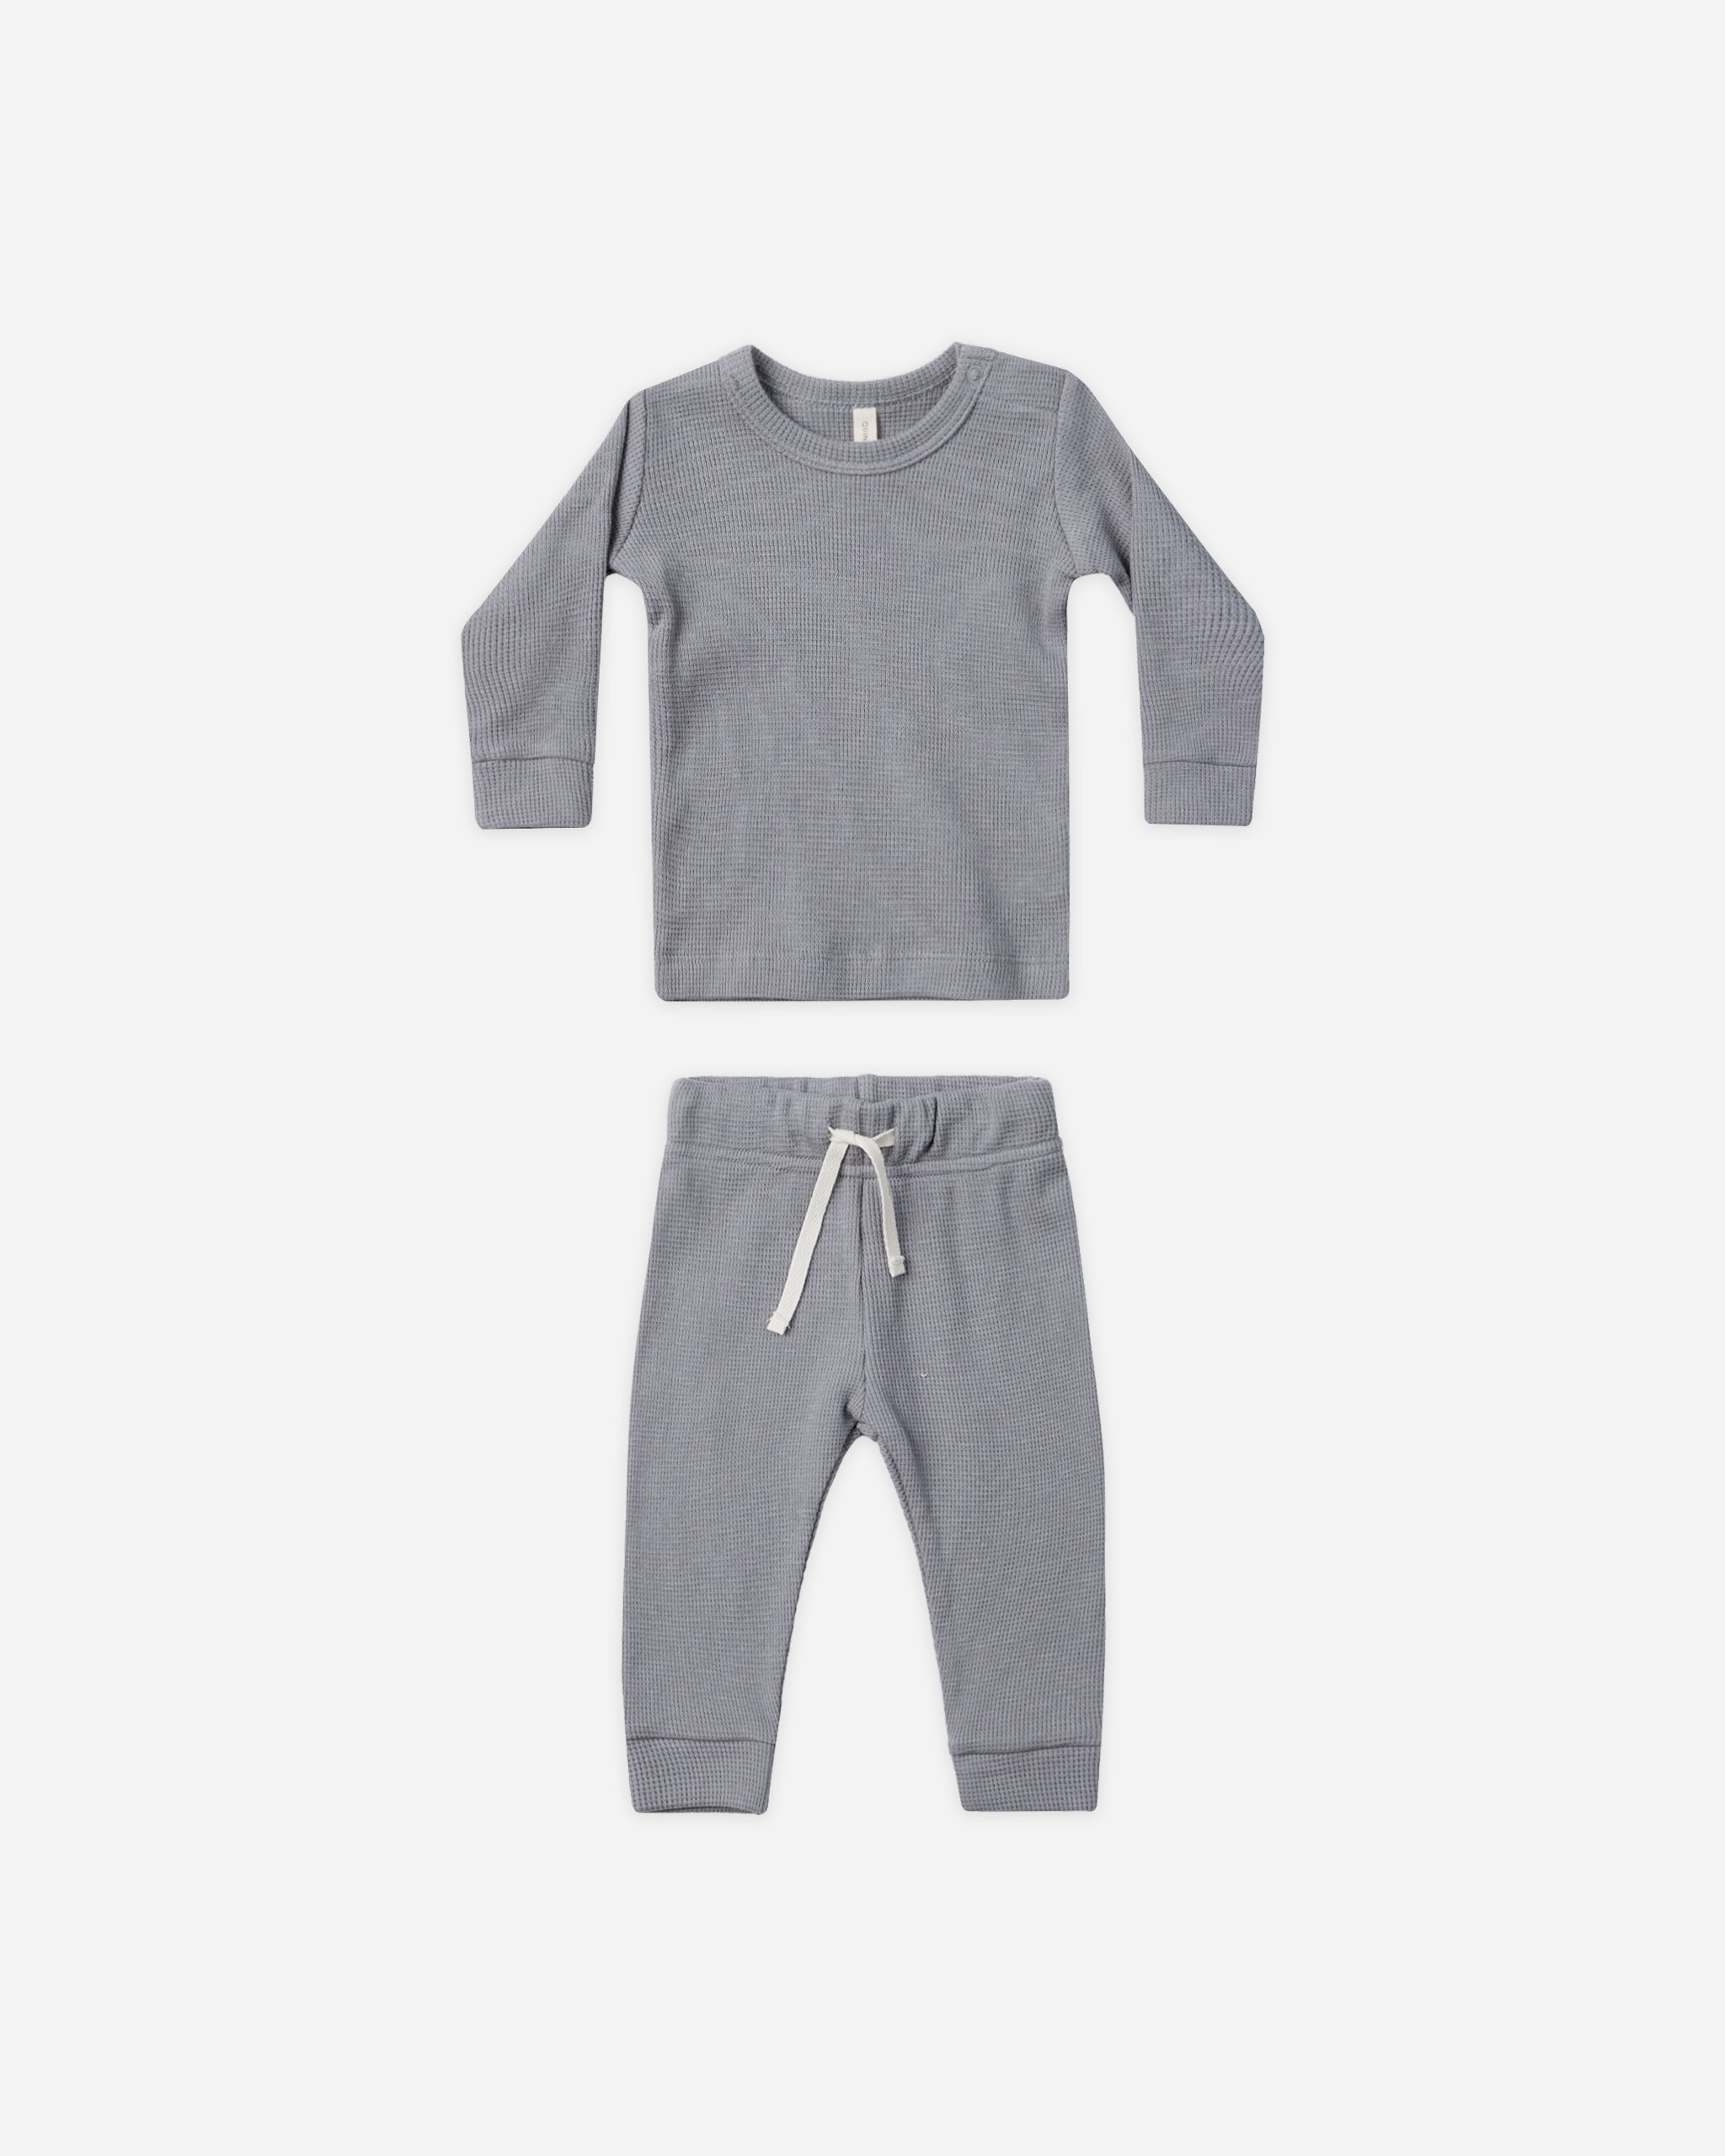 Waffle Top + Pant Set || Lagoon - Rylee + Cru | Kids Clothes | Trendy Baby Clothes | Modern Infant Outfits |